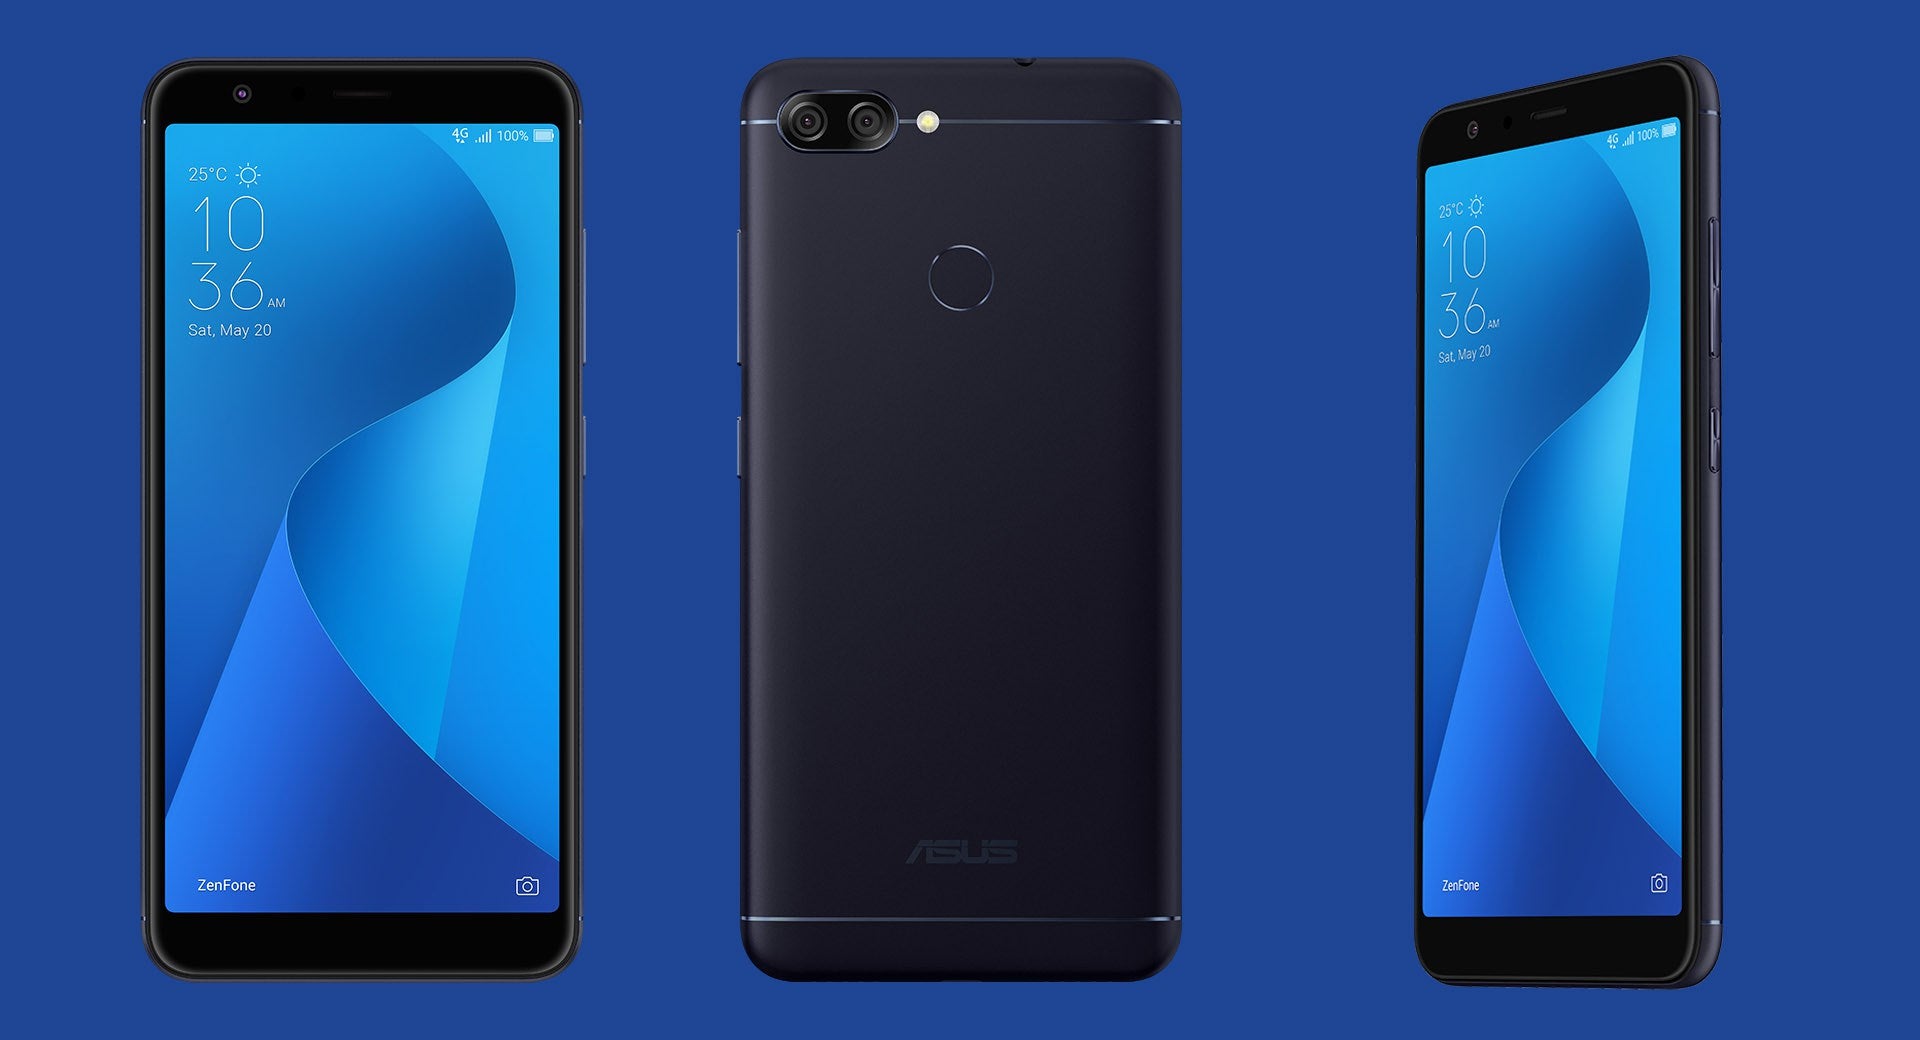 Asus announces its first smartphone with 18:9 display, the Pegasus 4S